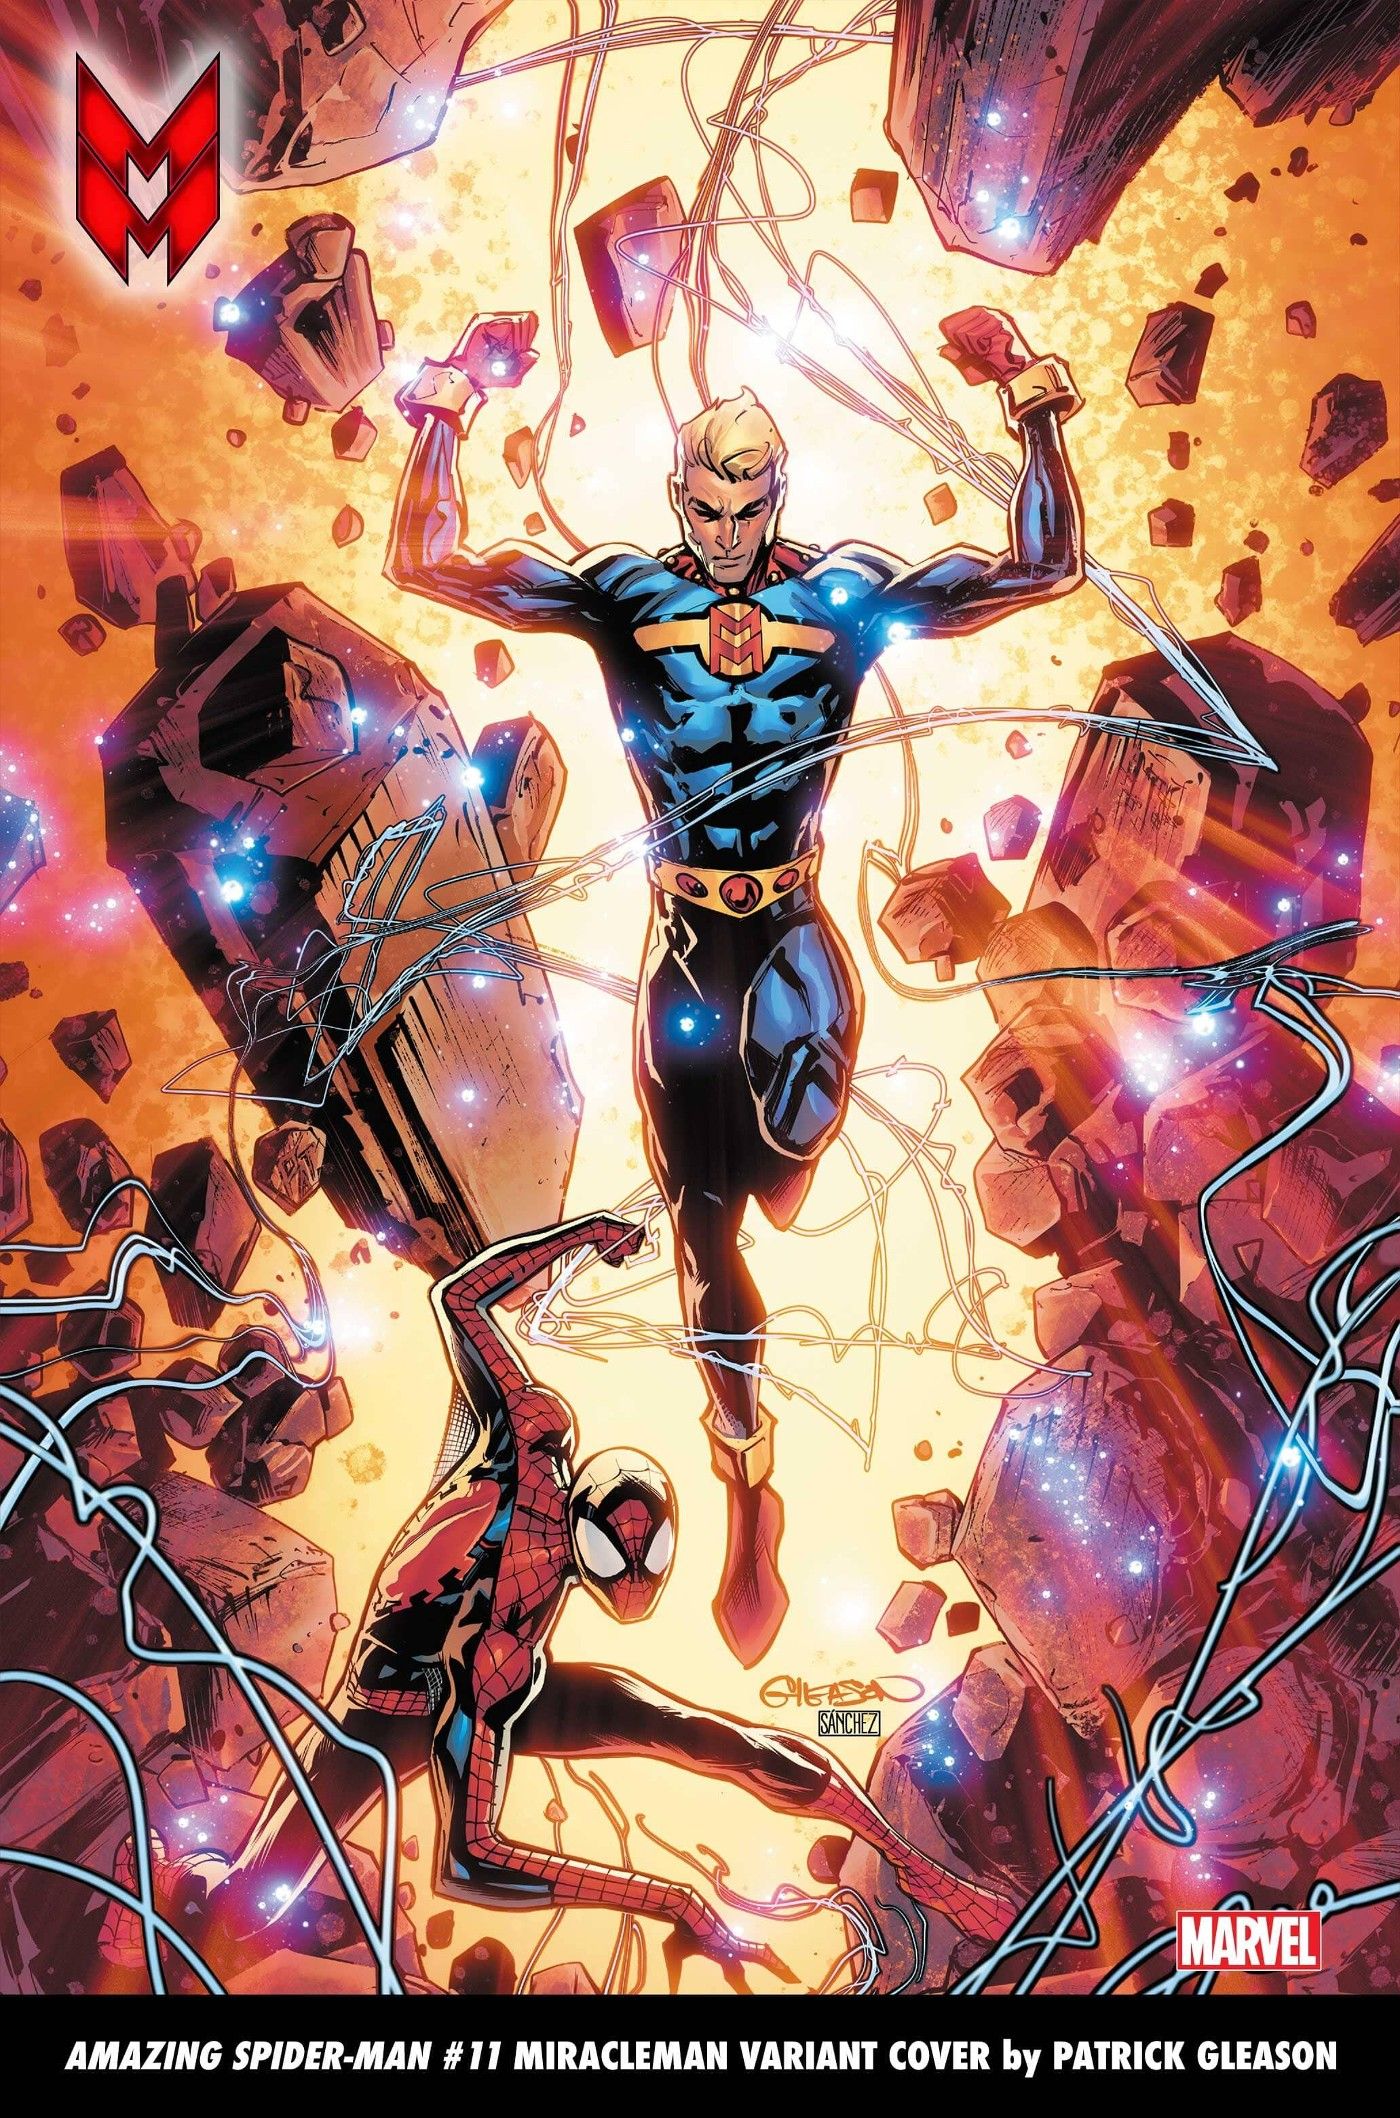 AMAZING SPIDER-MAN 11 MIRACLEMAN VARIANT COVER by PATRICK GLEASON